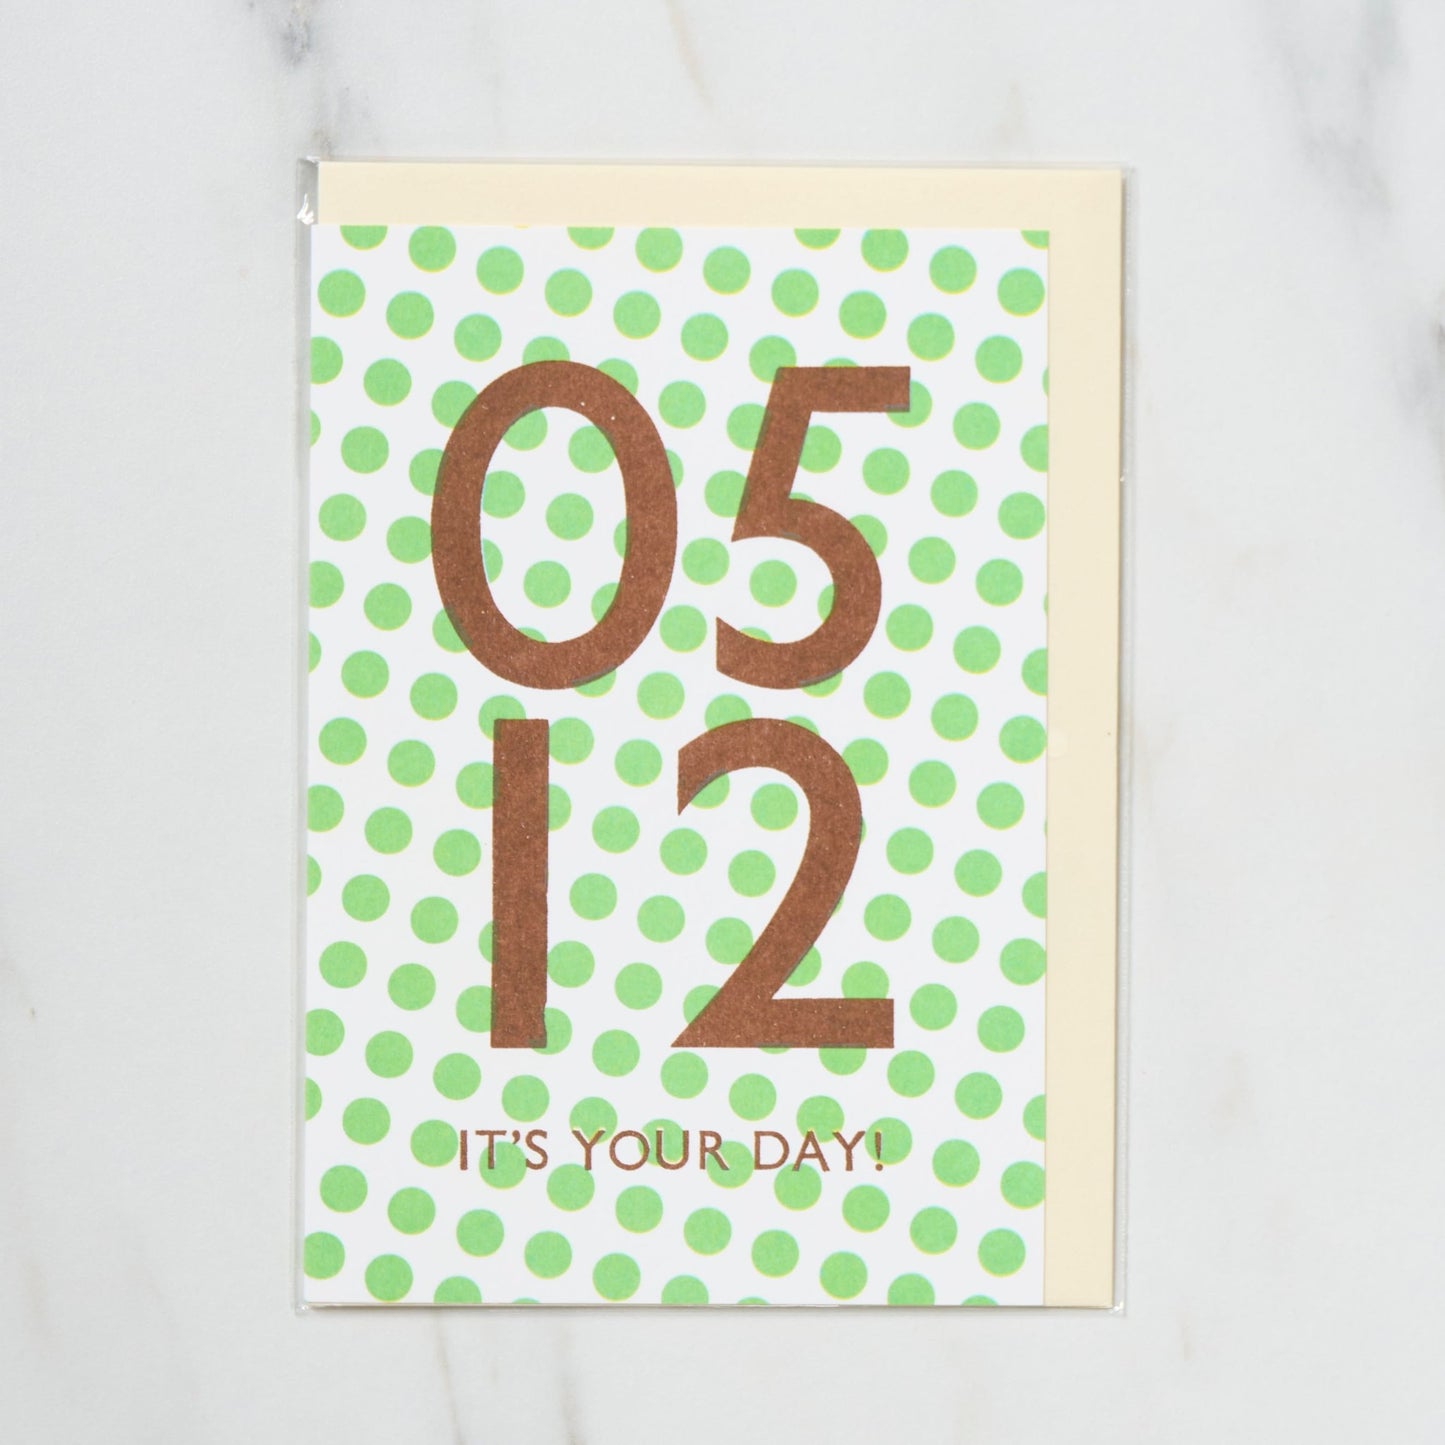 365 Find Your Day Card MAY / Letterpress Letter